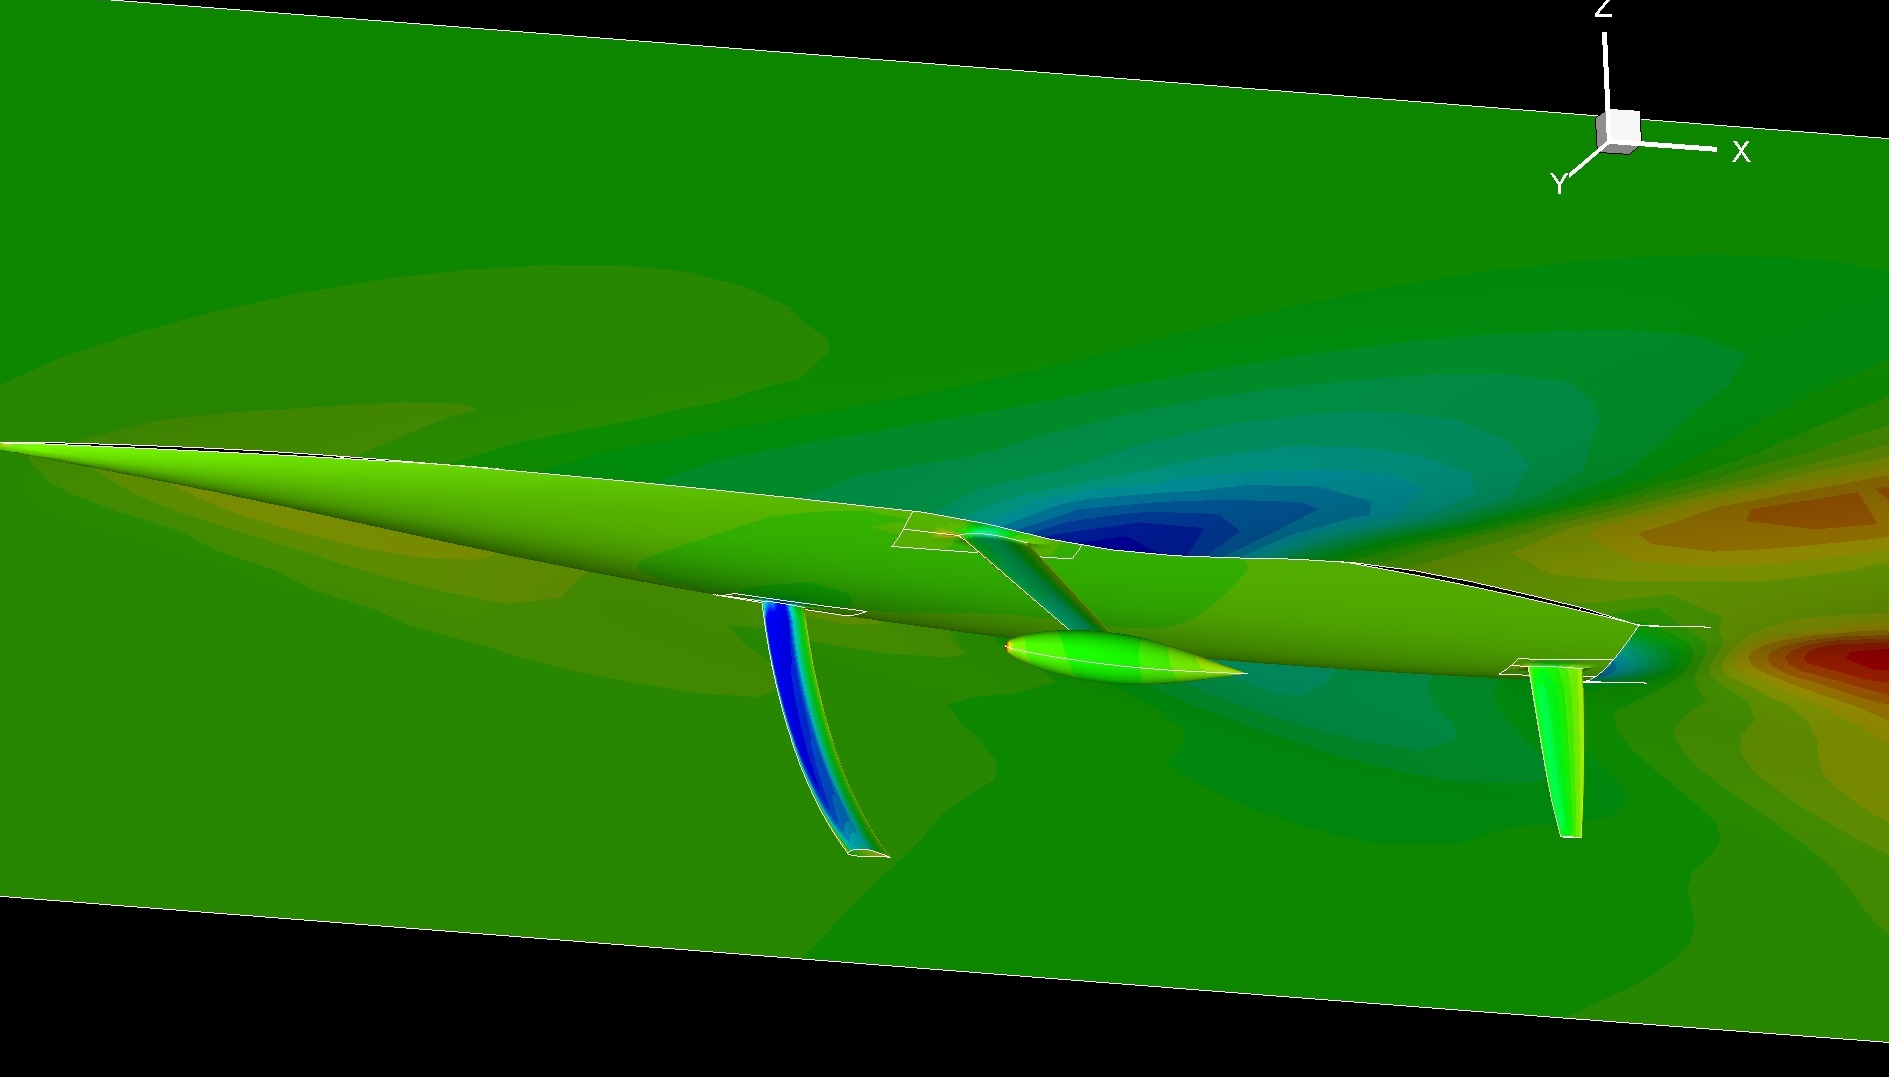 .This is part of a computational fluid dynamic CFD series of studies looking at foil design to gain further understanding in naval architecture terms to the design of an MOCA 60. Owen Clarke had previously looked at foiling yacht design in a previous generation of yachts but at that time the cost and risk of development was considered too high. In this series of CFD and scale model tests we compared a series of curved foils and dihedral daggerboards combined with T foil rudders.